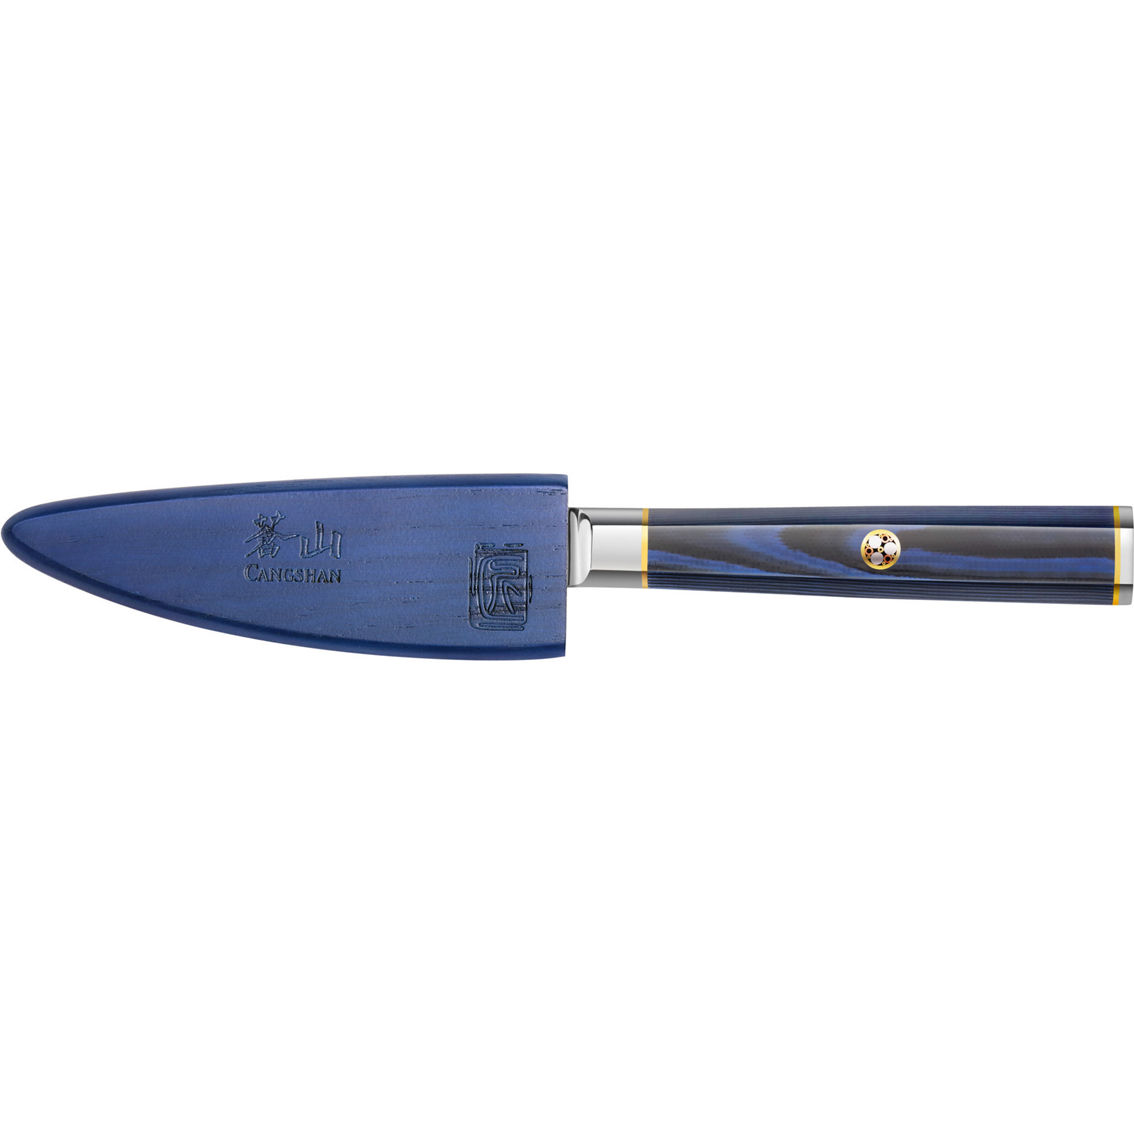 Cangshan Cutlery Kita Series 3.5 in. Paring Knife with Sheath - Image 2 of 6